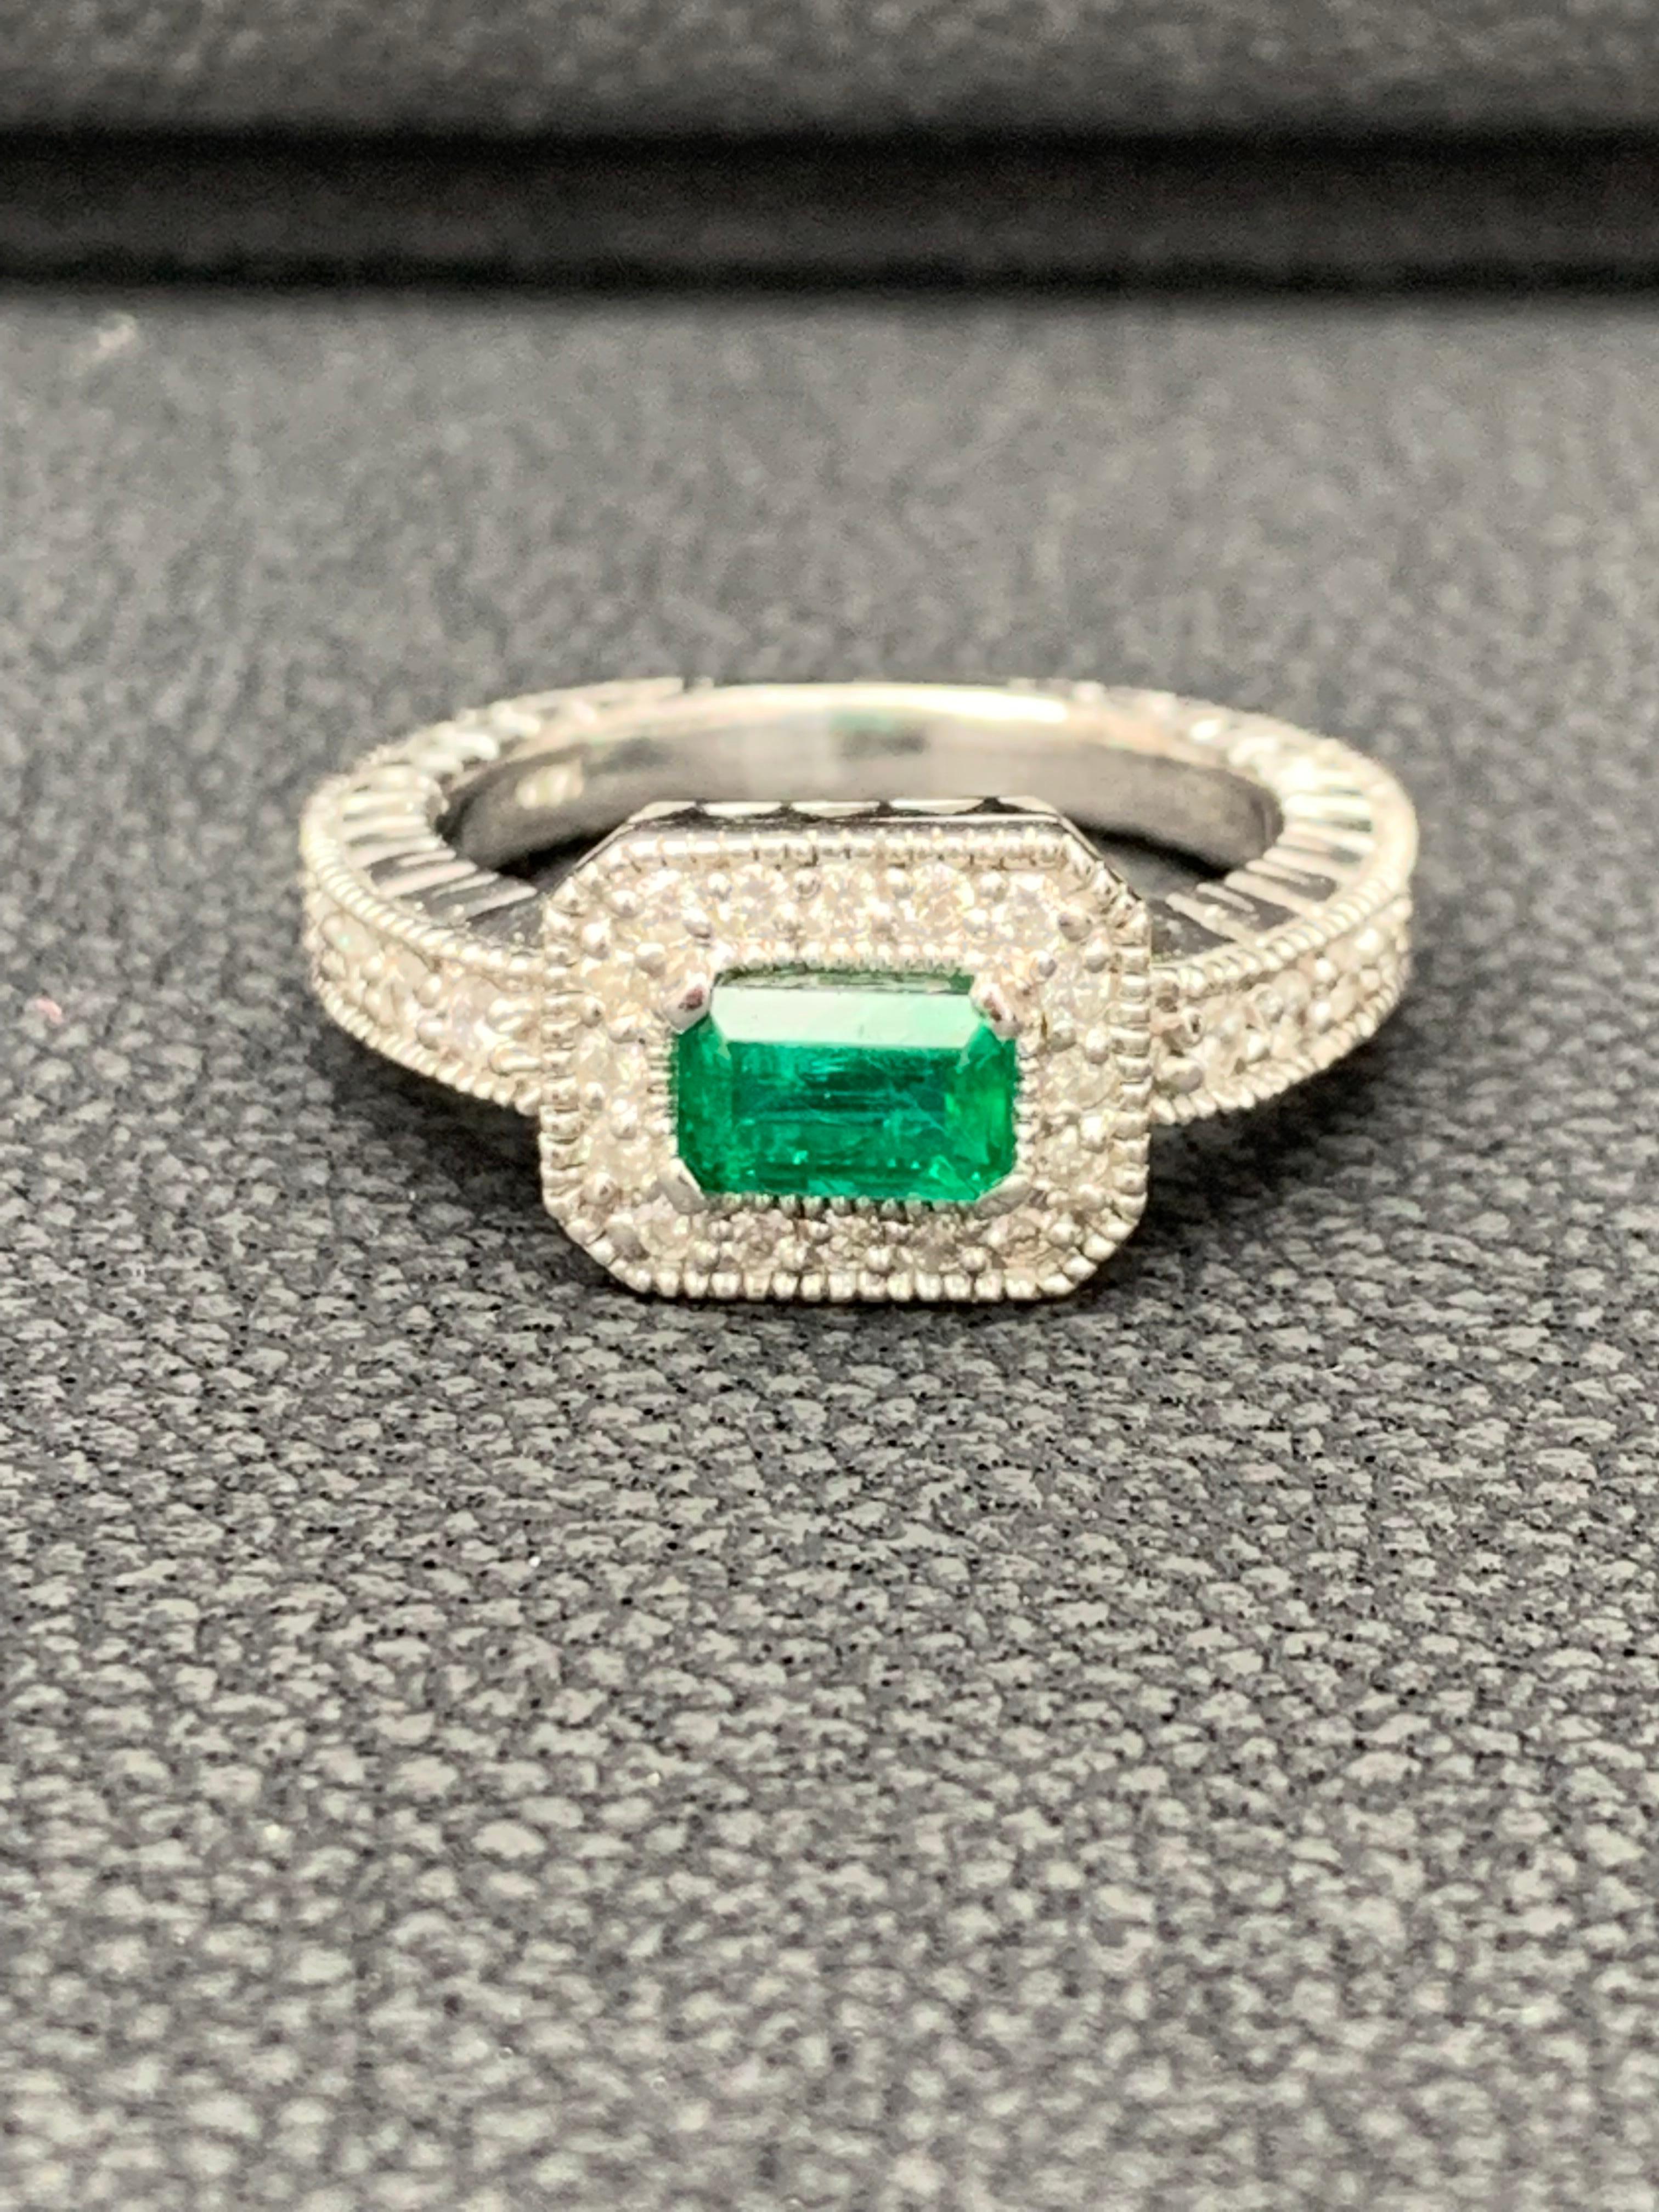 Featuring a 0.70 carat color-rich green emerald, elegantly set in an 14k white gold setting encrusted  round diamonds. Diamonds weigh 0.30 carats total.

Size 6.5 US (Sizable). One of a Kind  piece.
All diamonds are GH color SI1 Clarity.
Style